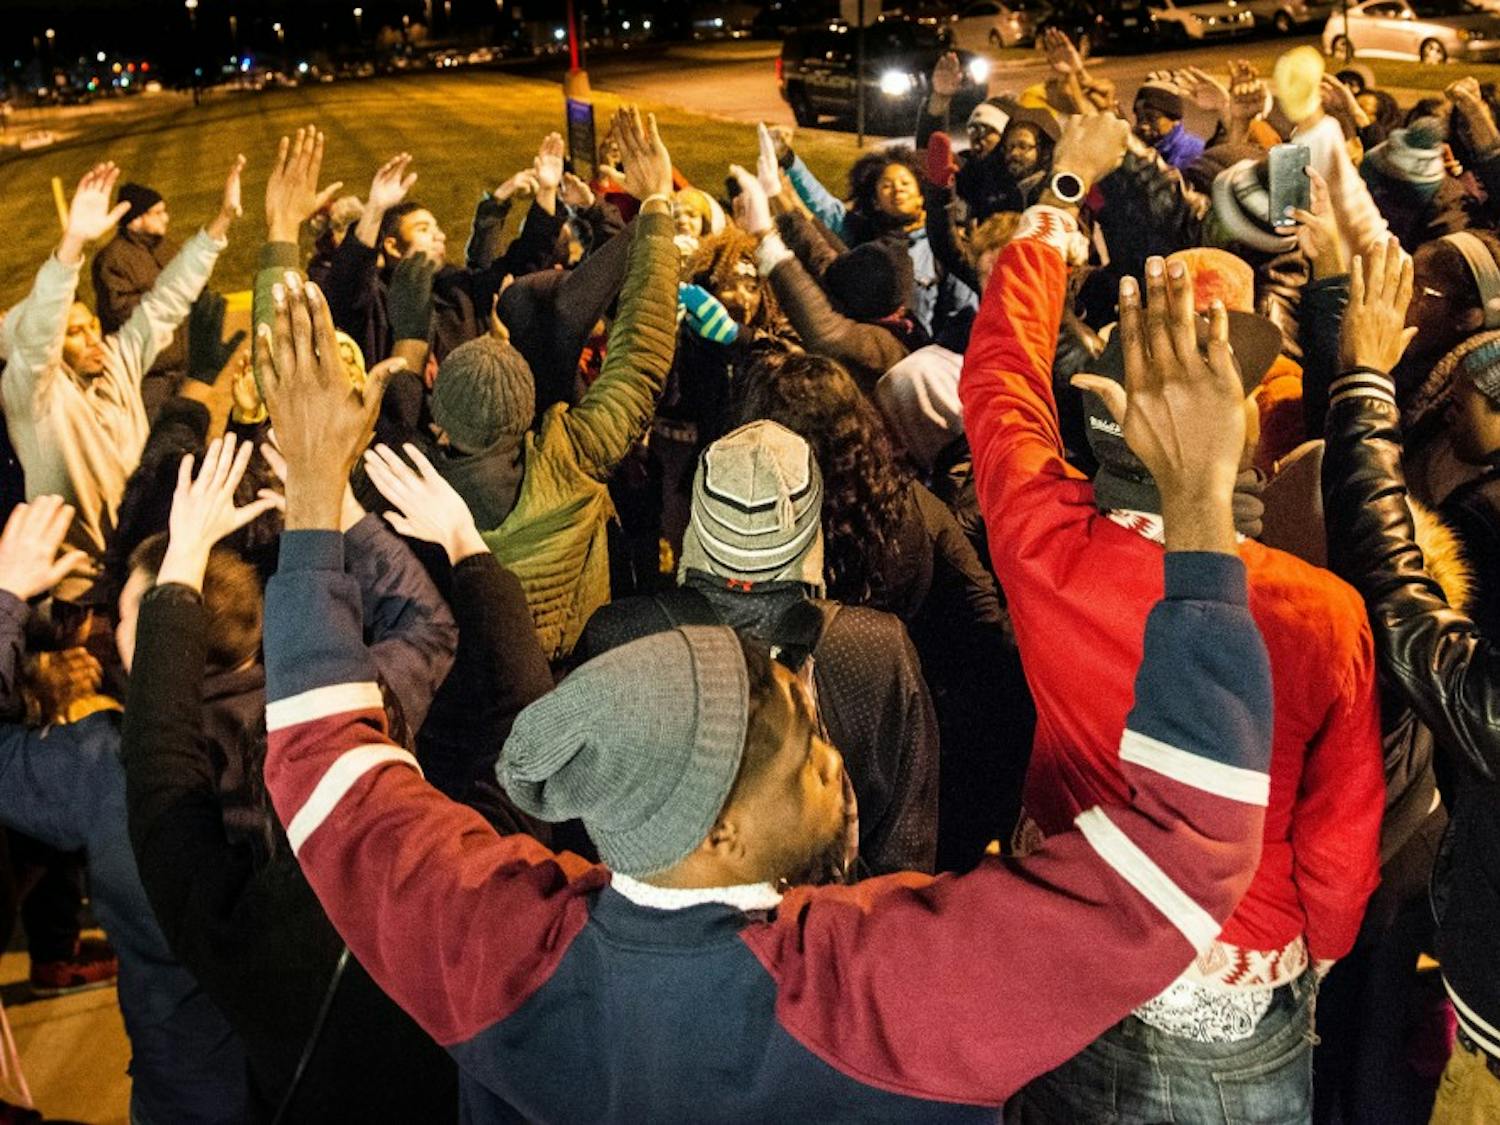 Students chant “hands up, don't shoot,” during a peaceful protest of the Ferguson verdict on EMU's campus tonight. Photo by Sage Stephens.